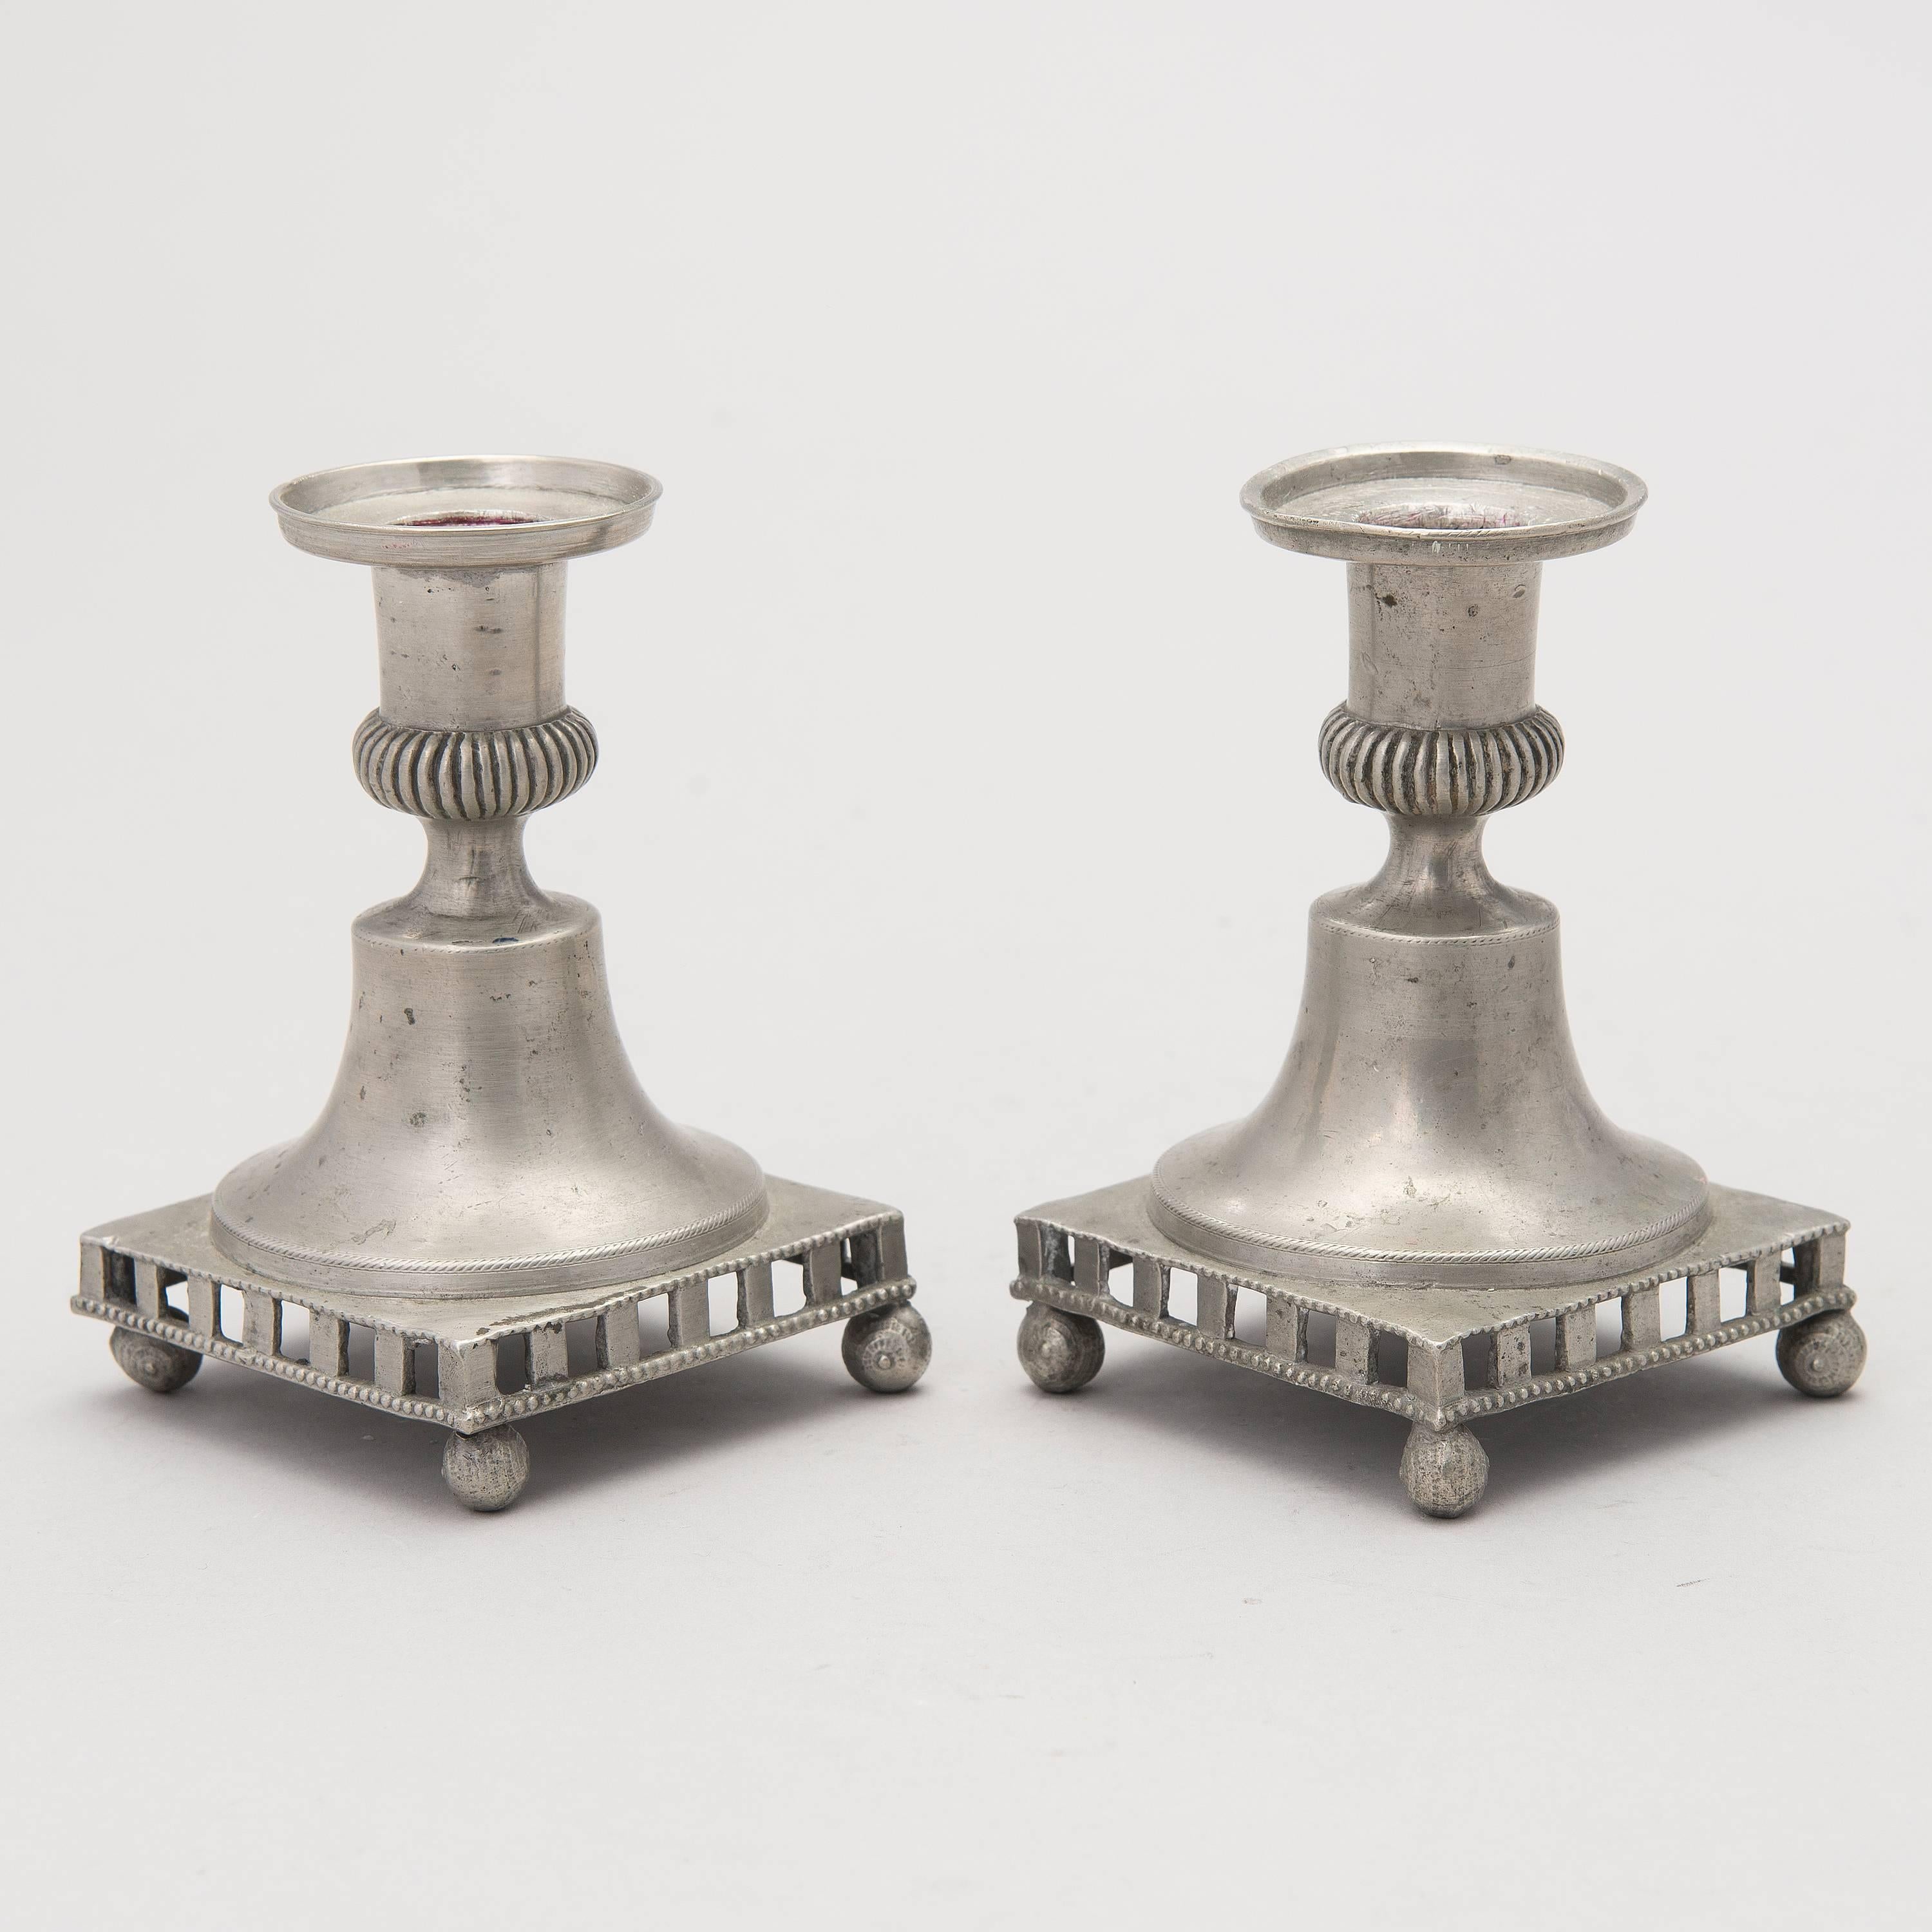 Pair of Gustavian pewter candlesticks by Melchior Leffler, circa 1800, Visby.